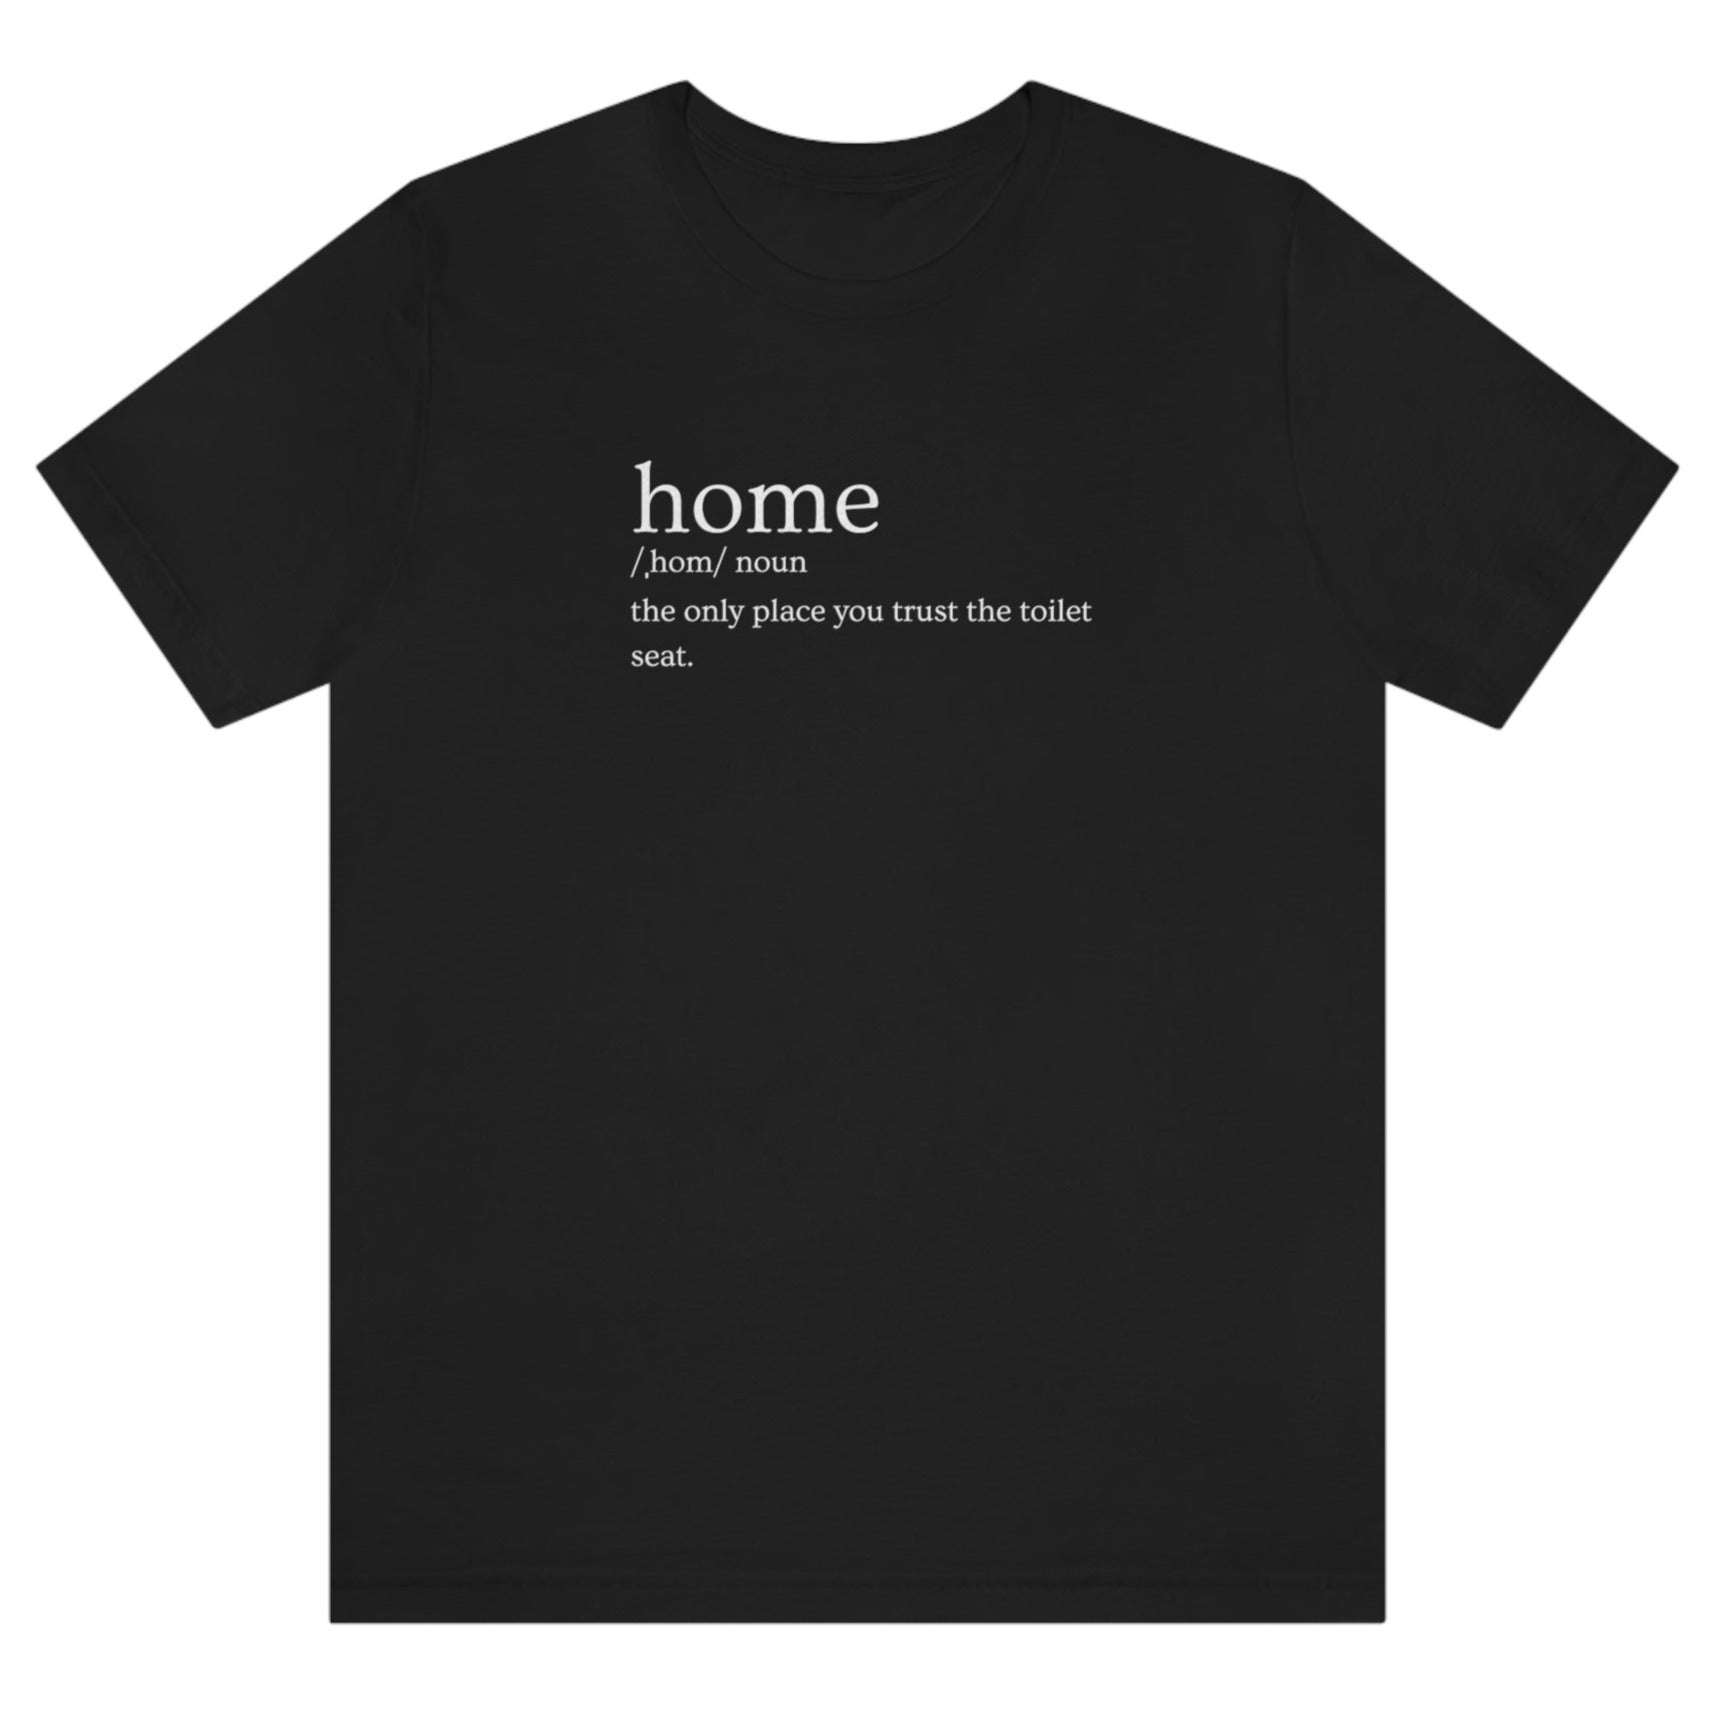 home-the-only-place-you-trust-the-toilet-seat-black-t-shirt